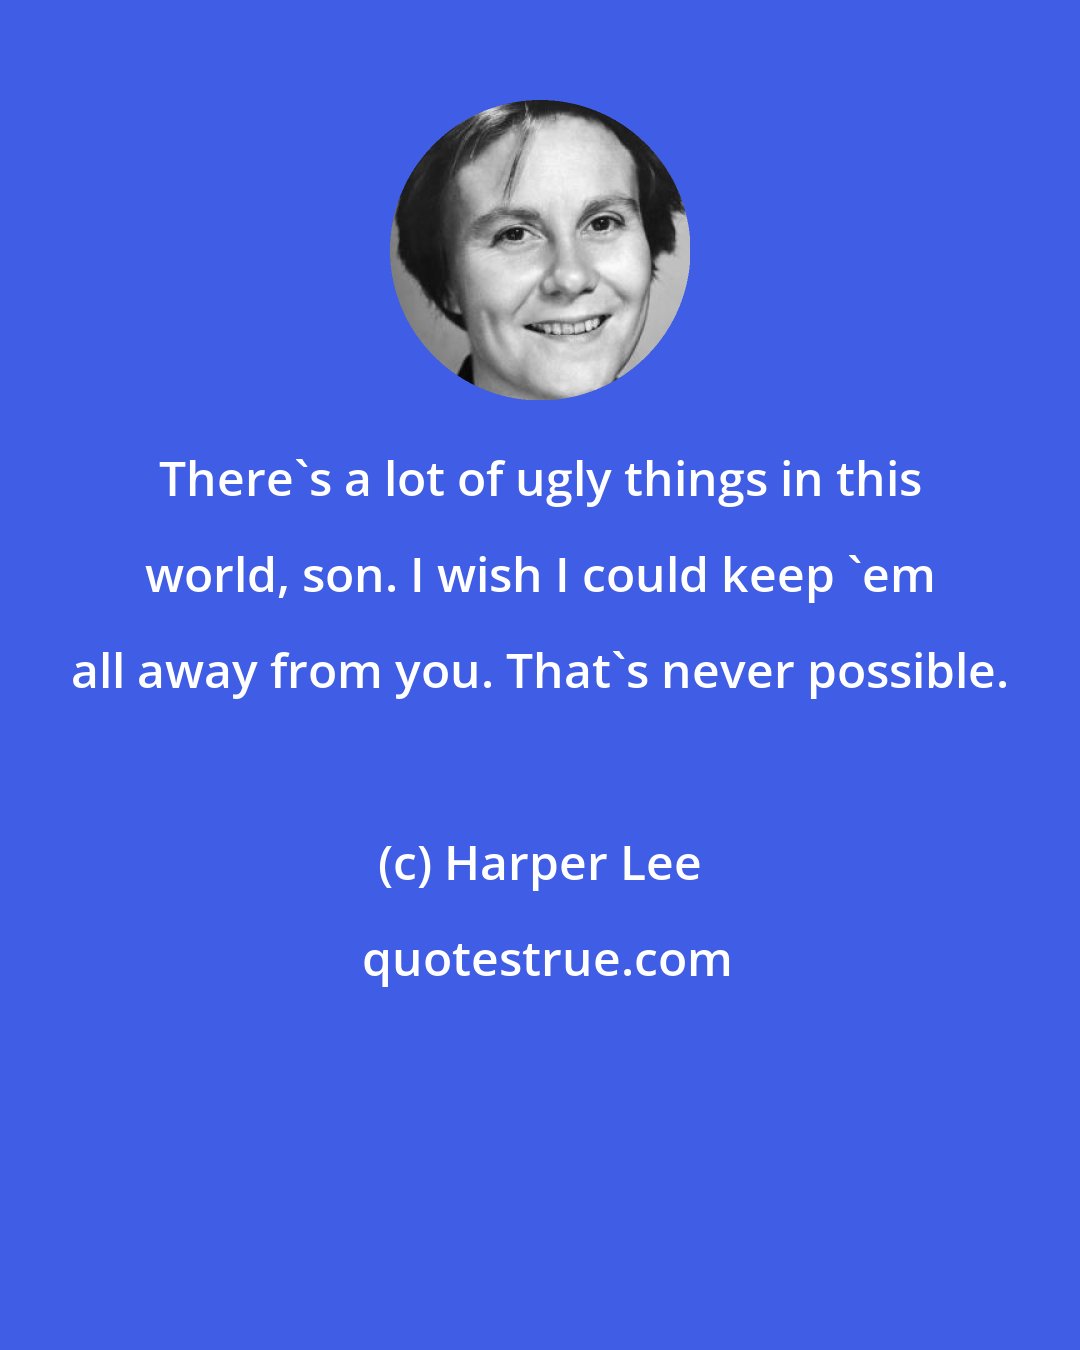 Harper Lee: There's a lot of ugly things in this world, son. I wish I could keep 'em all away from you. That's never possible.